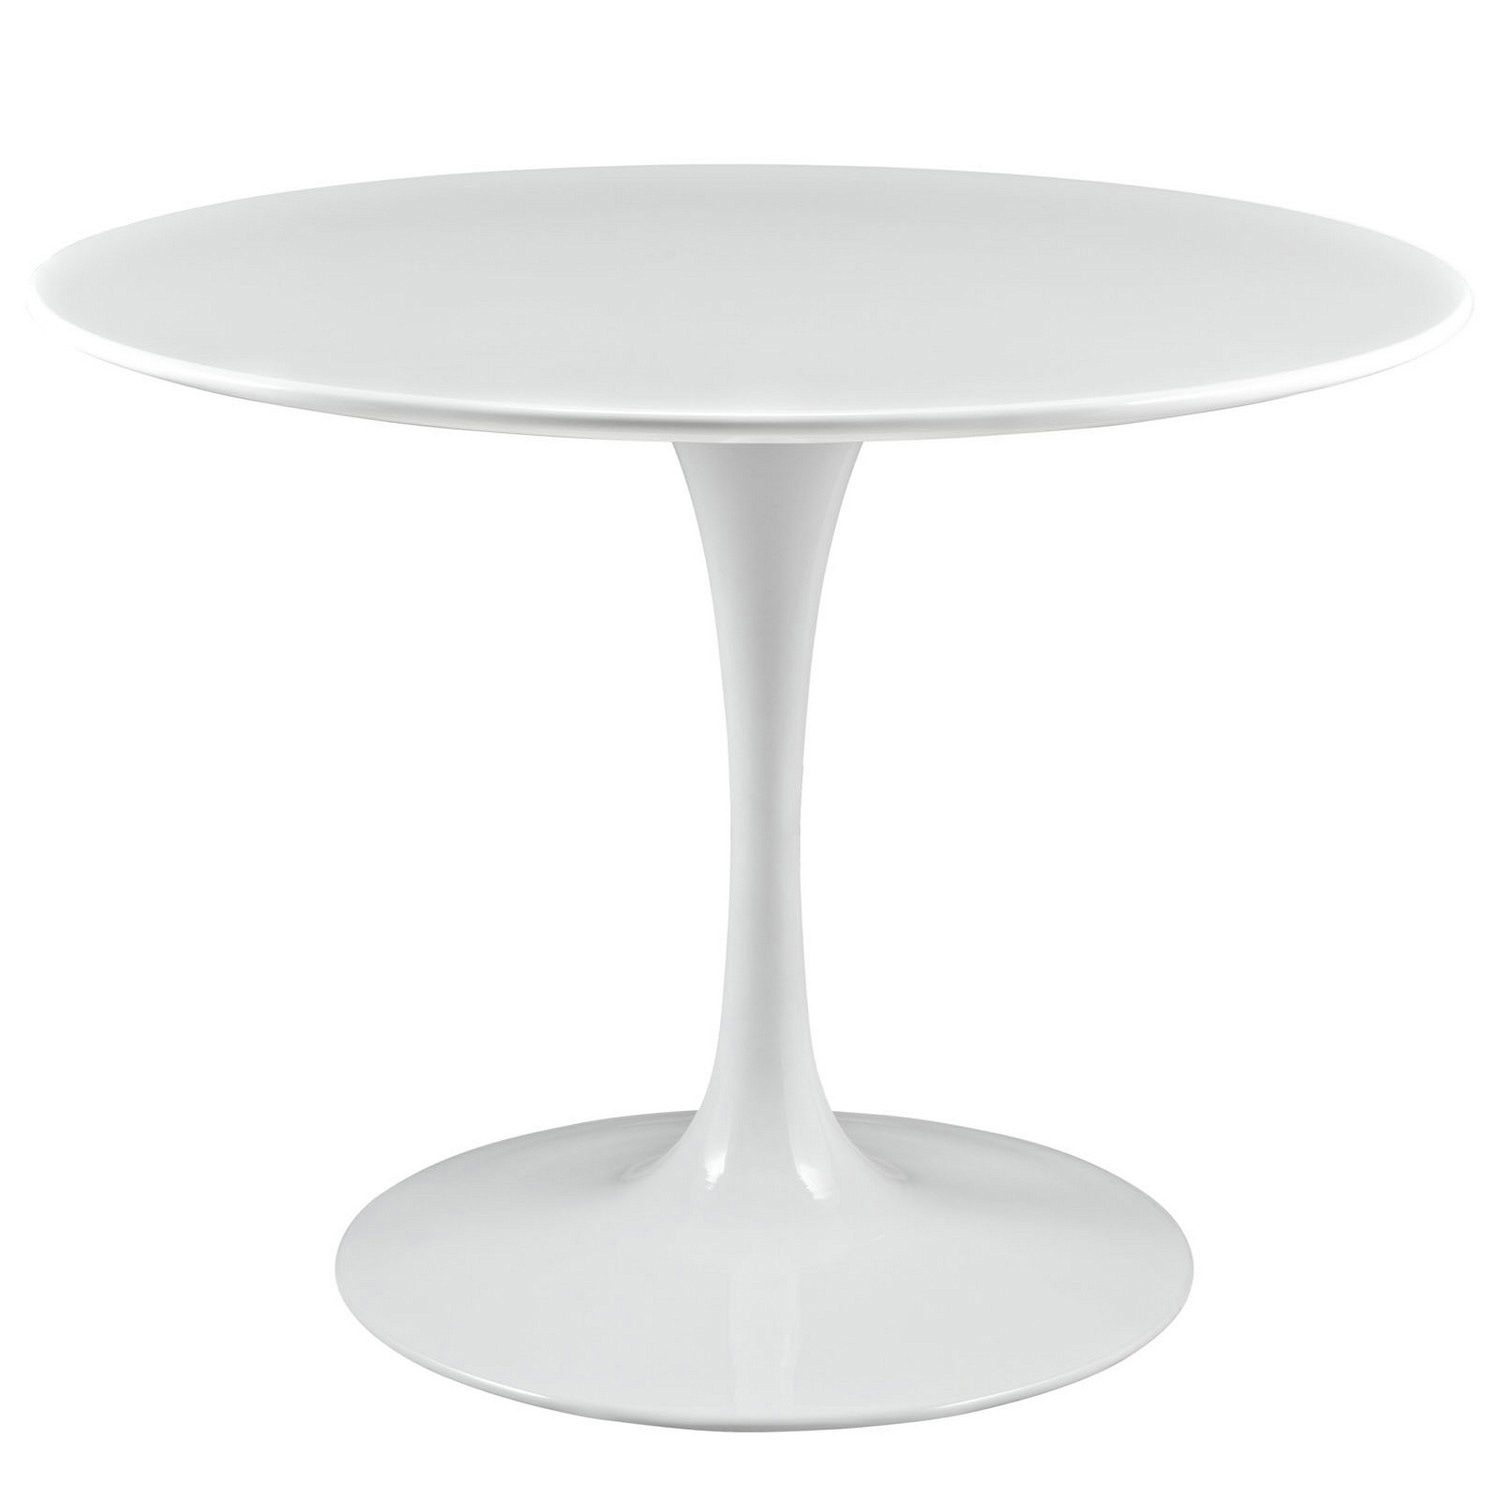 Modway Lippa 40 Wood Top Dining Table - White